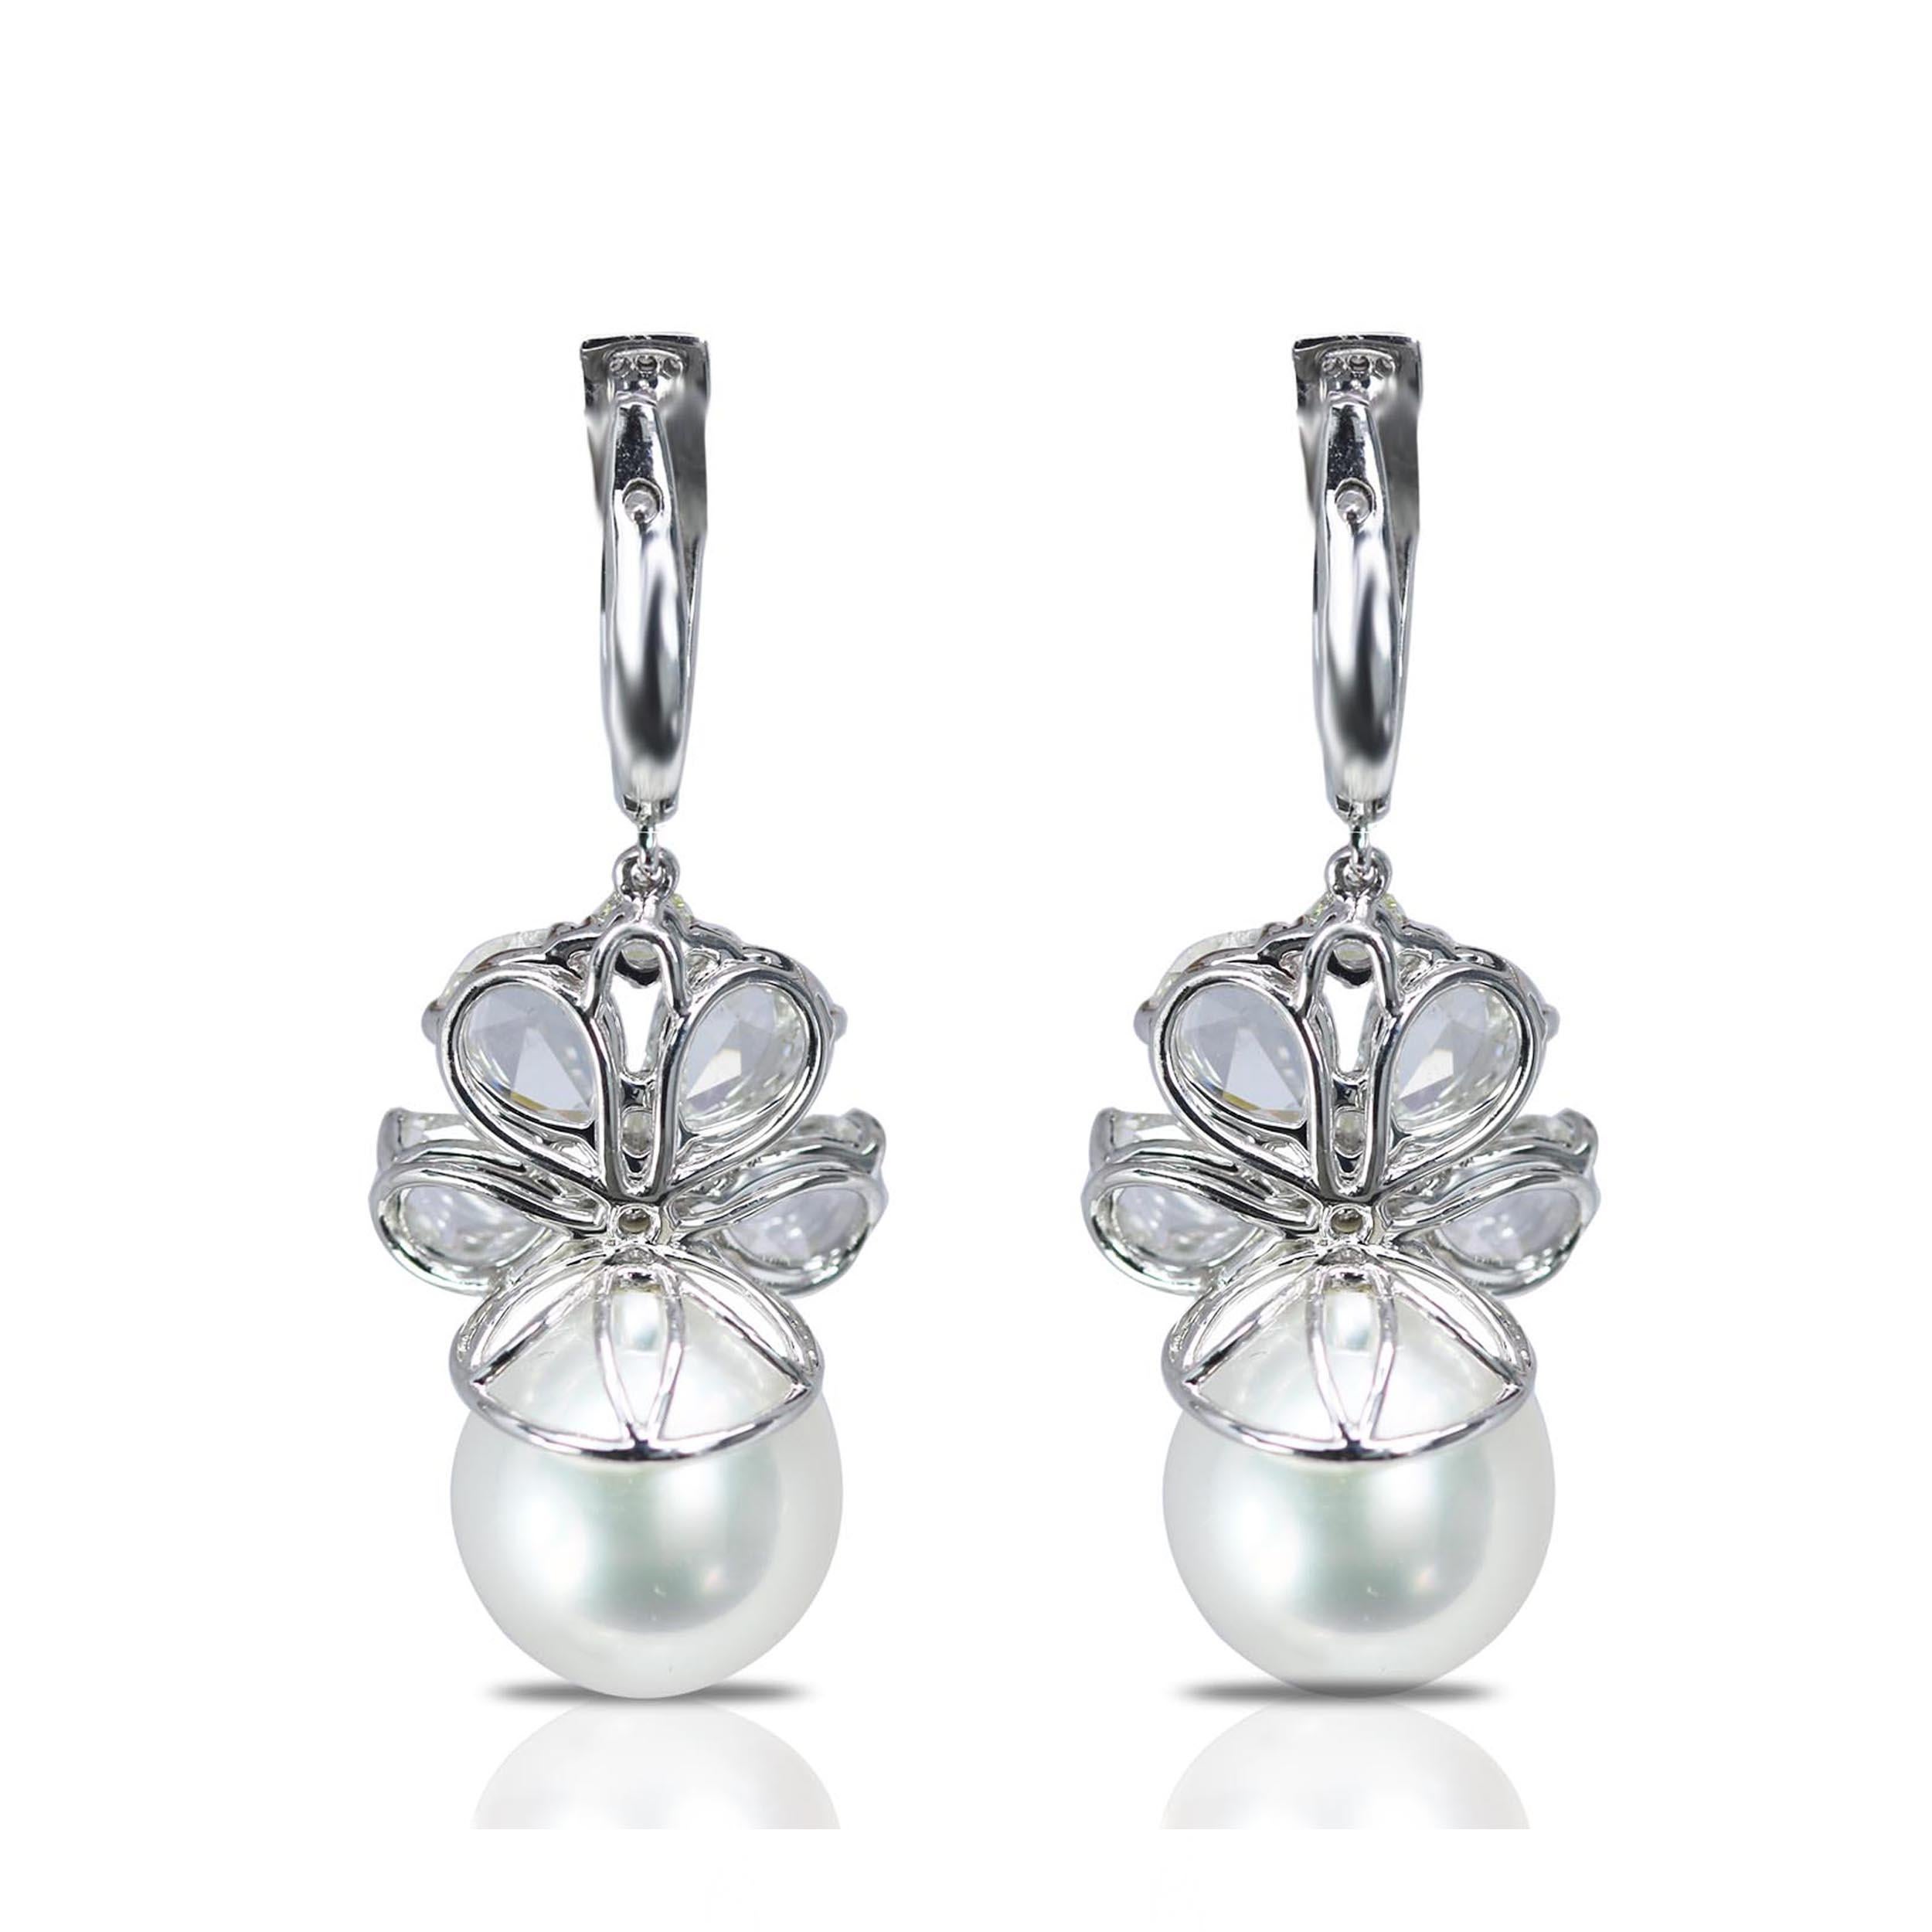 Contemporary Studio Rêves Rose cut Diamonds and South Sea Pearls Earrings in 18K Gold For Sale